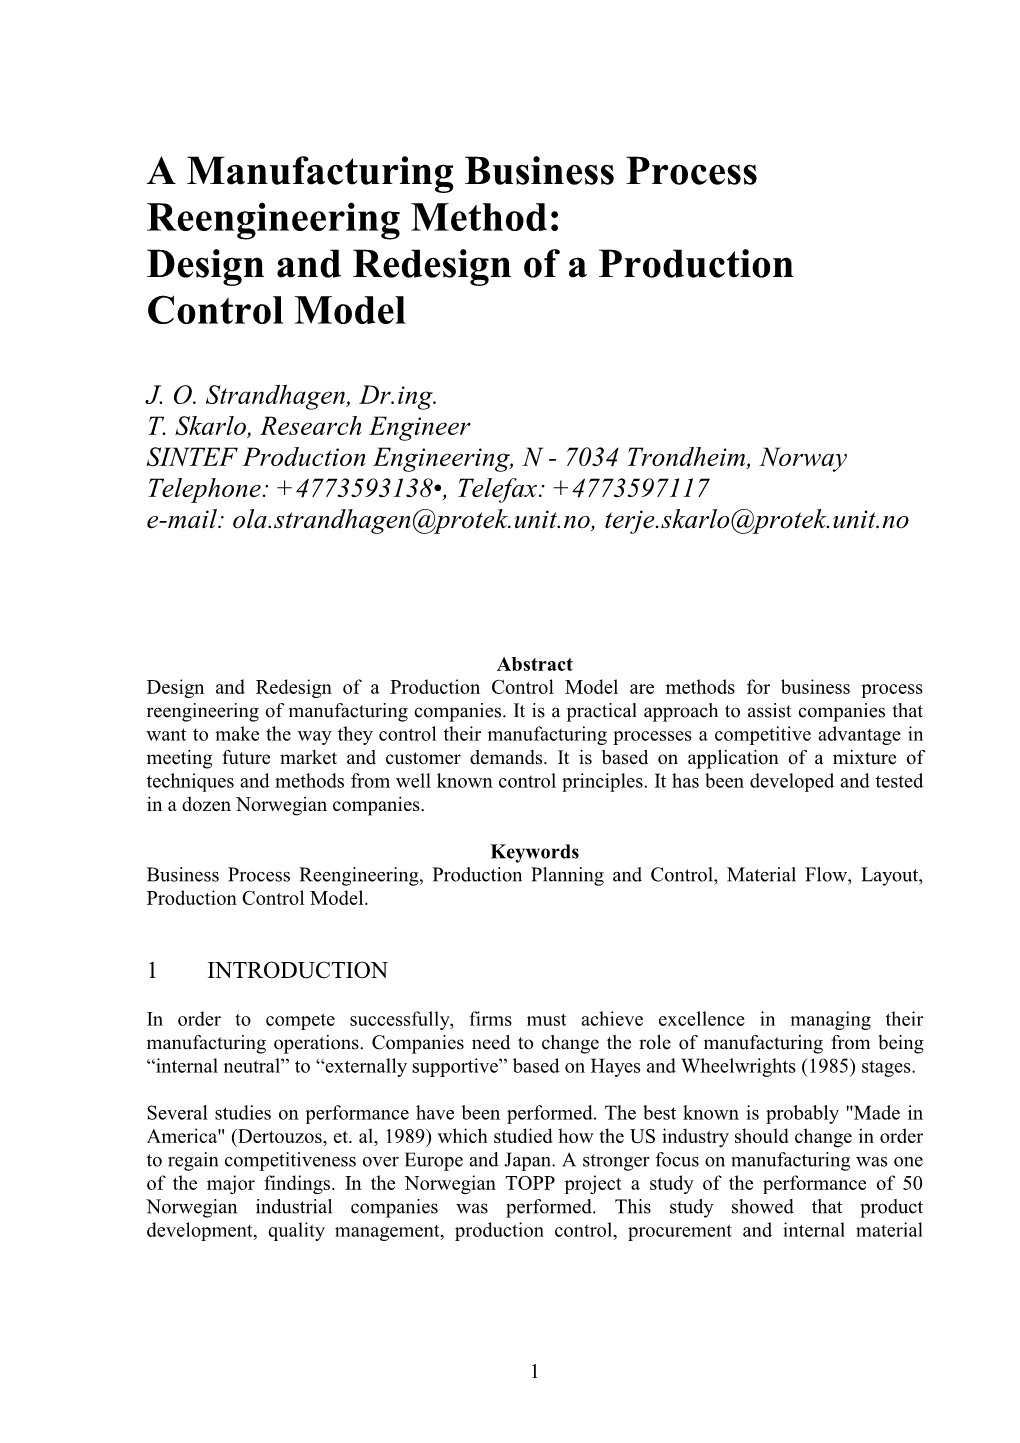 A Manufacturing Business Process Reengineering Method: Design and Redesign of a Production Control Model